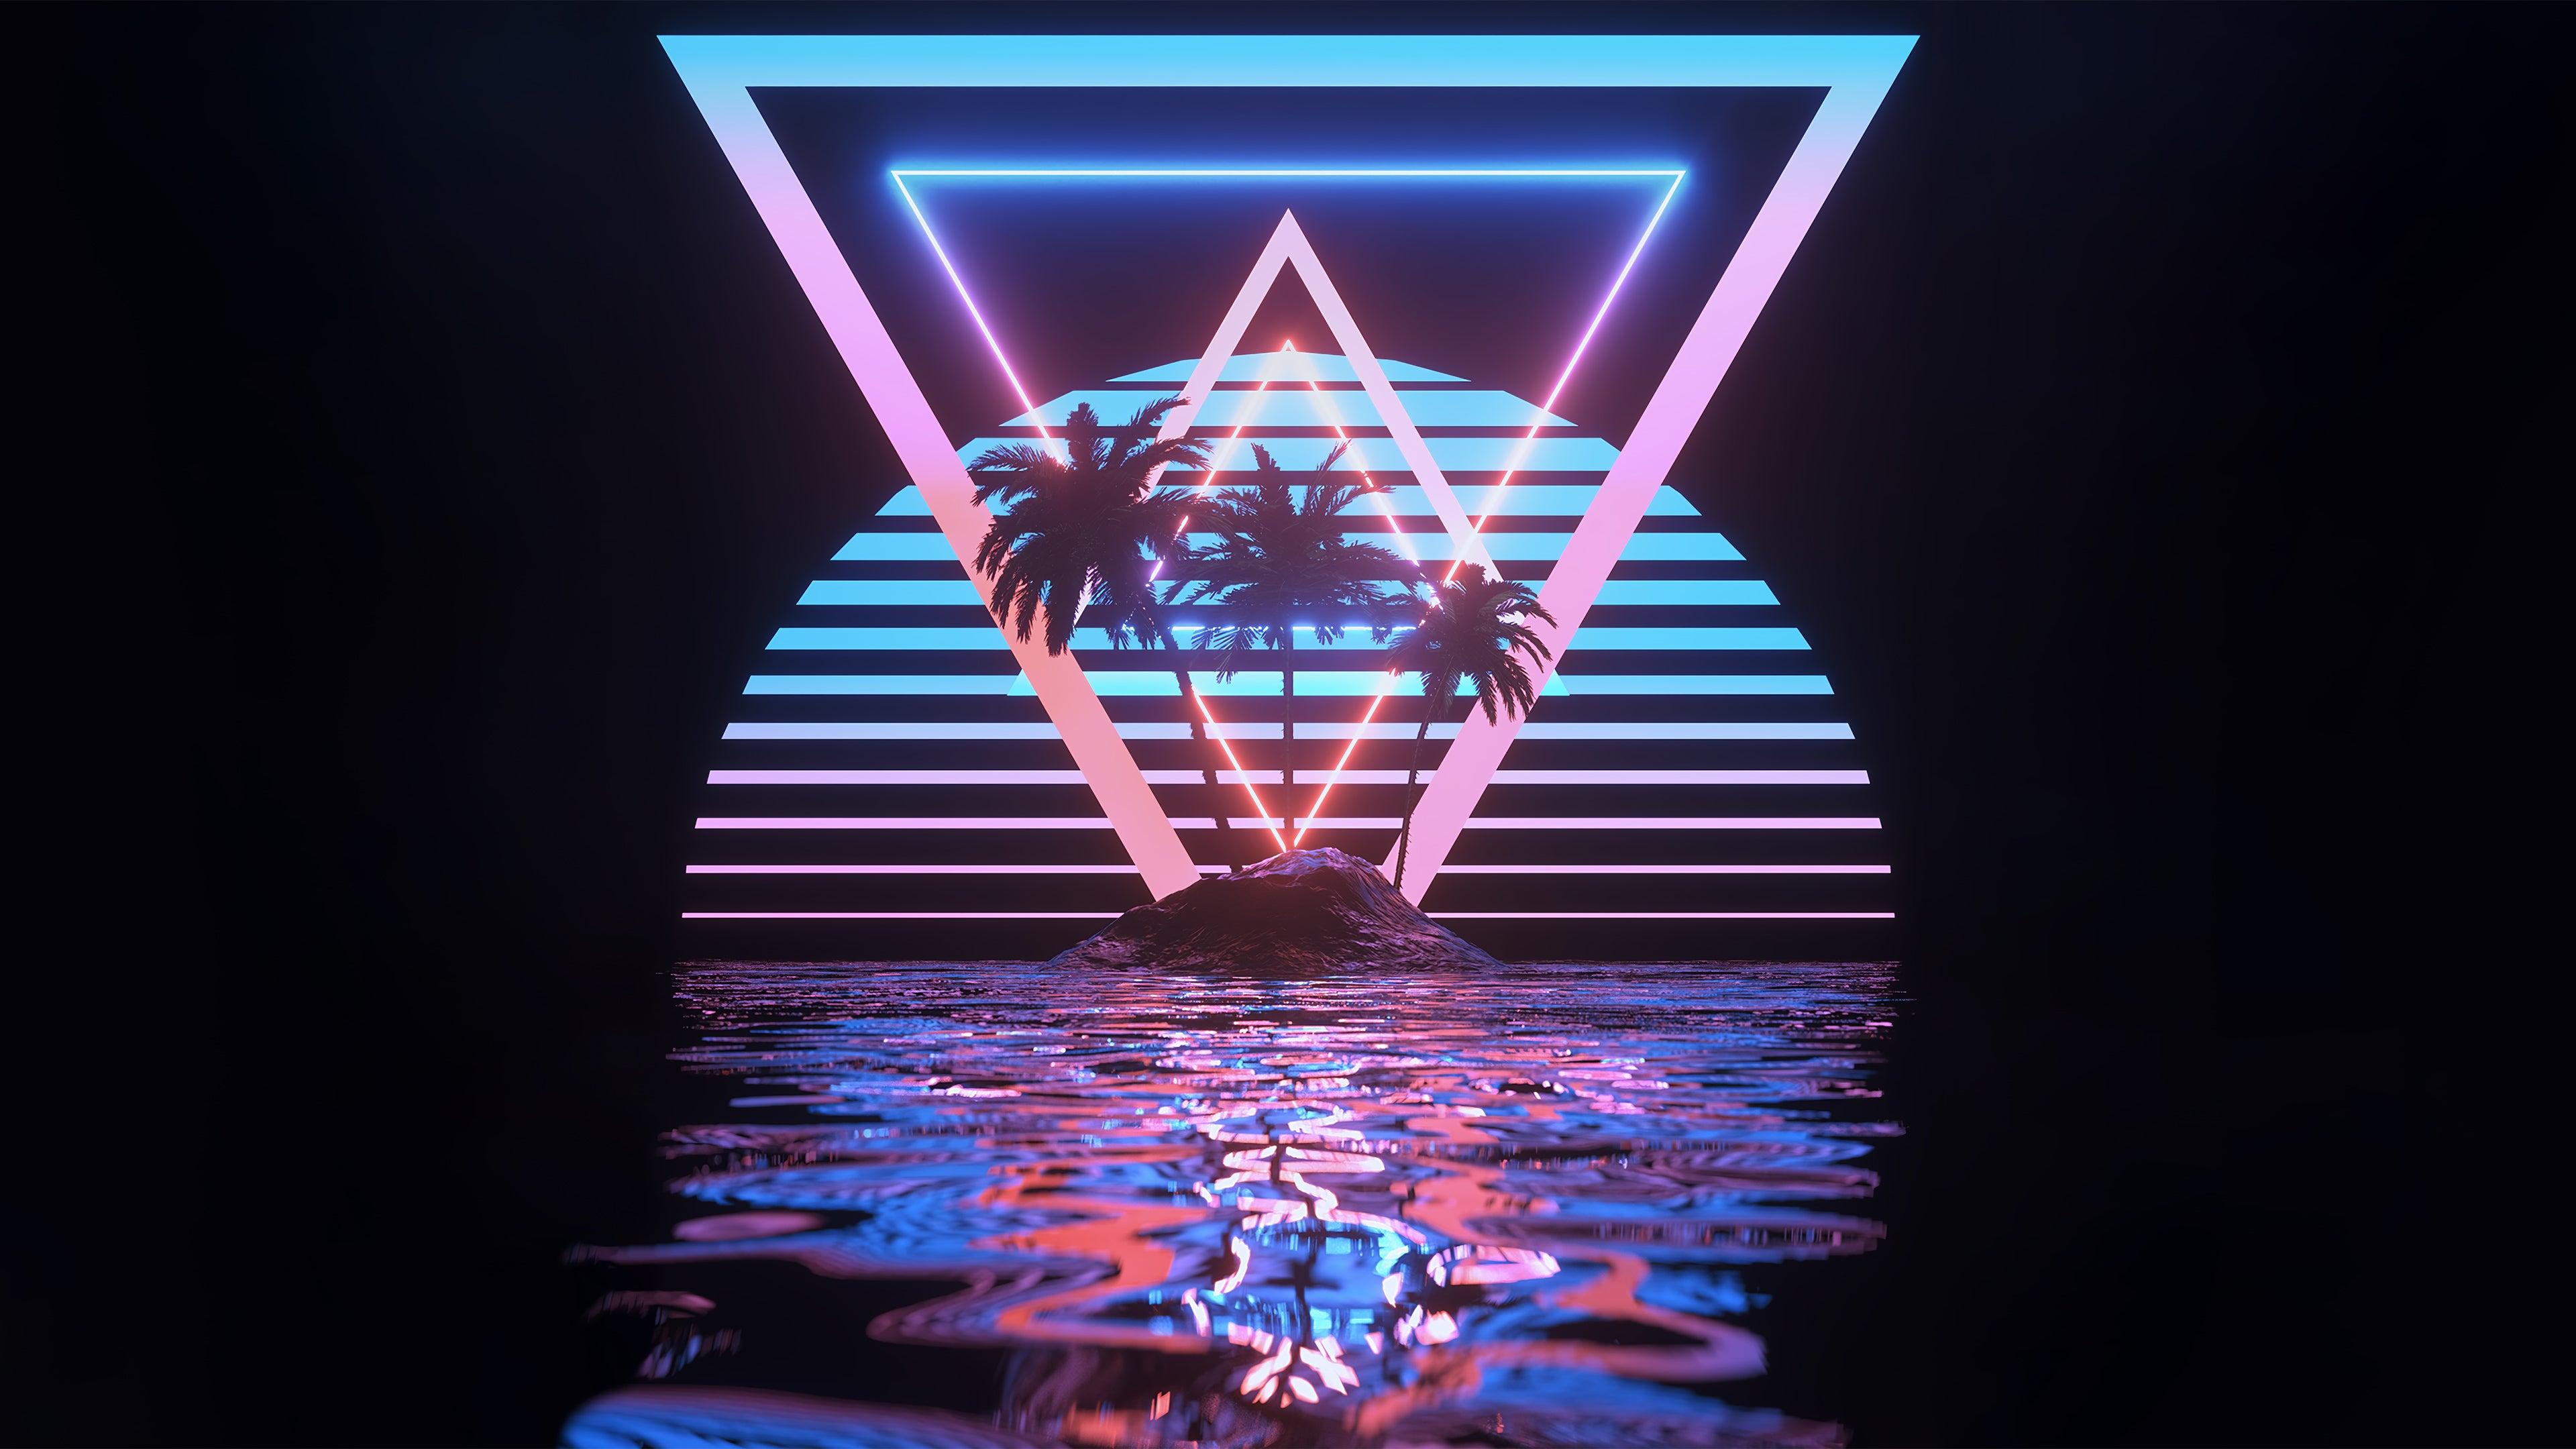 Outrun 4K wallpaper for your desktop or mobile screen free and easy to download